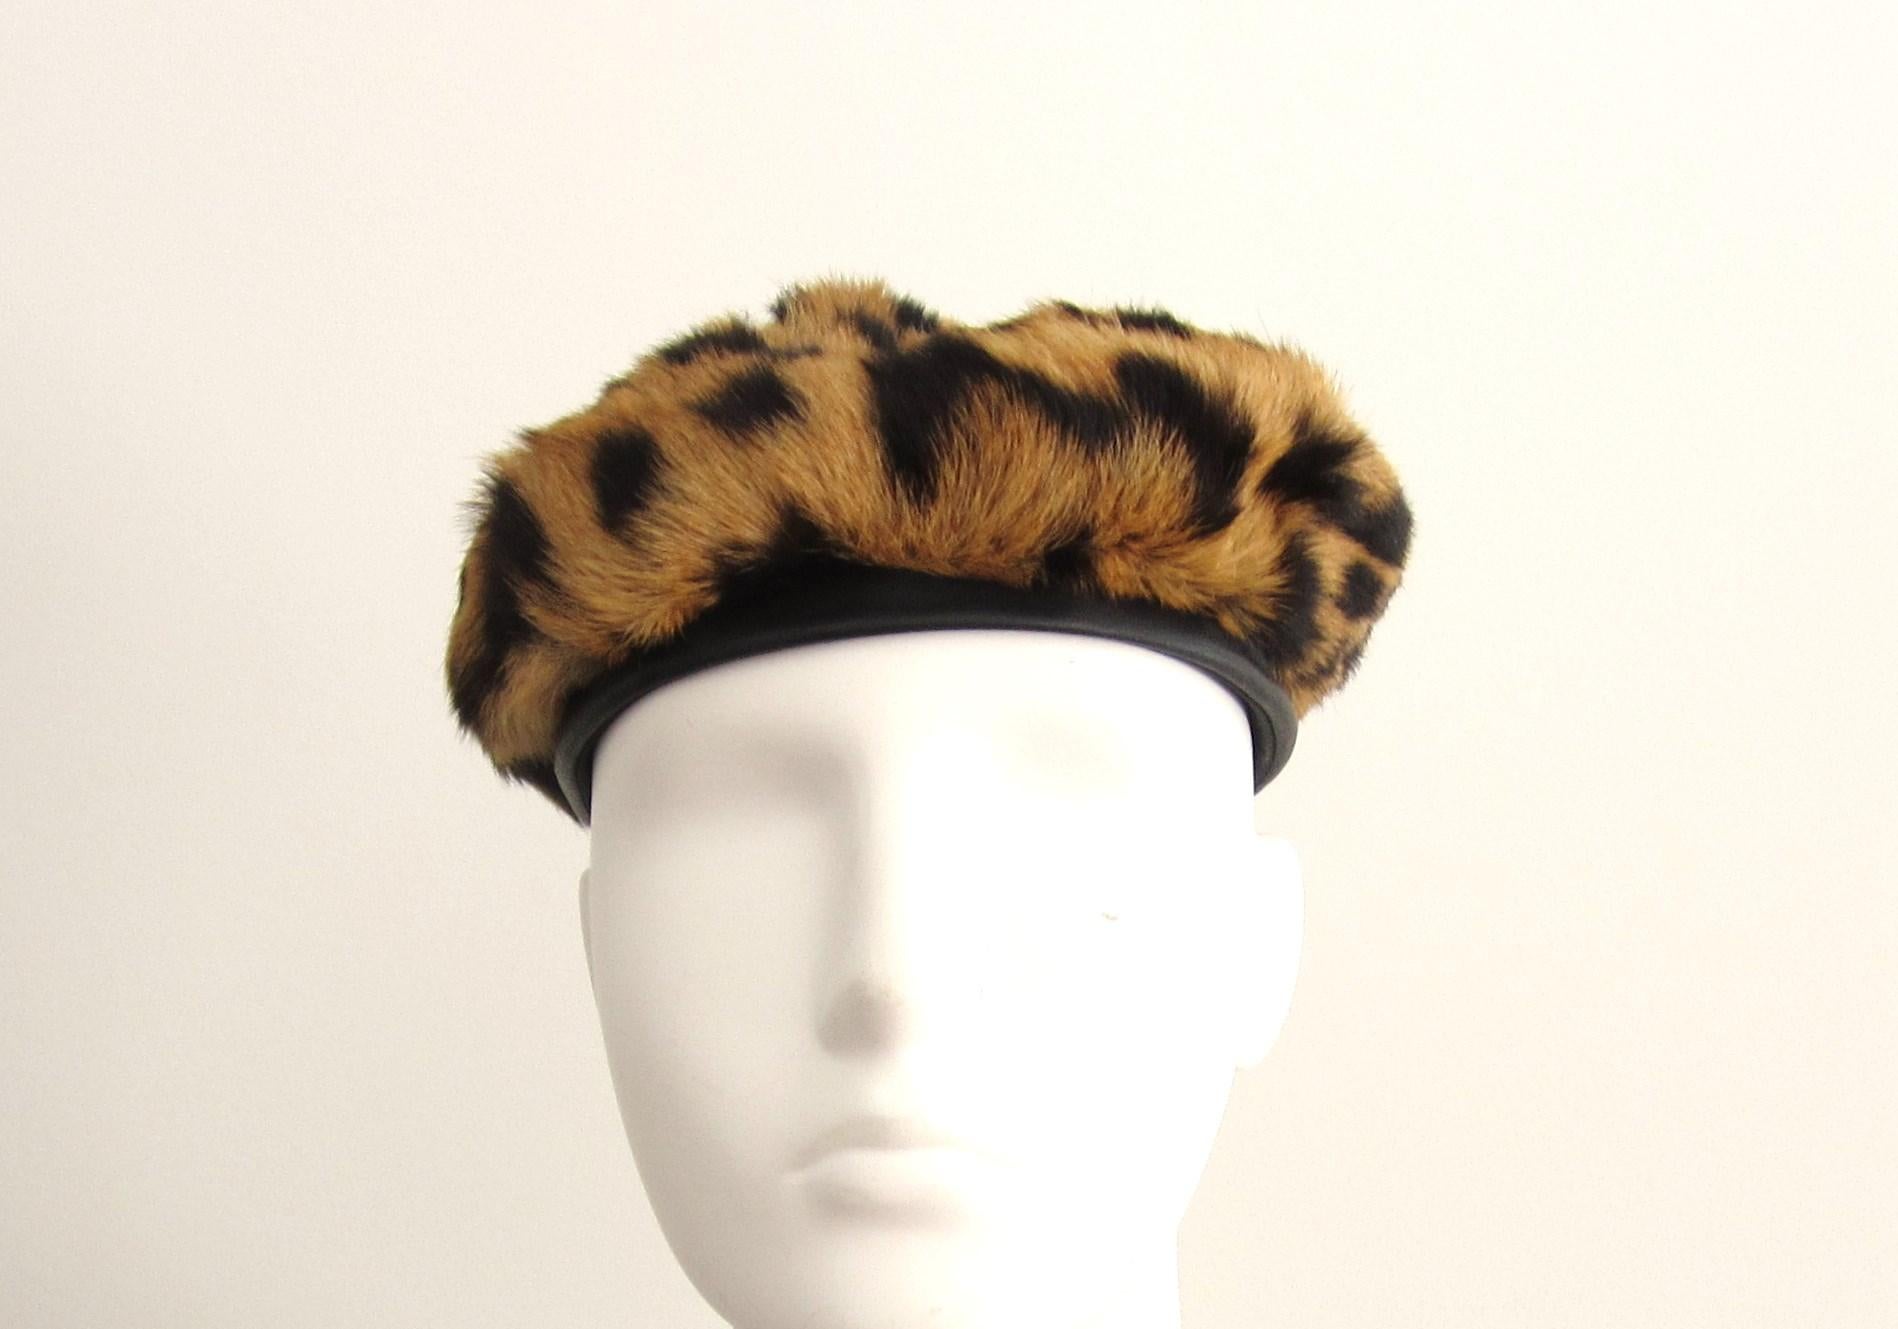 Stunning Leopard Beret with a leather band. Has a Saks 5th Ave. Label as well as being Monogrammed JM. Measuring 22